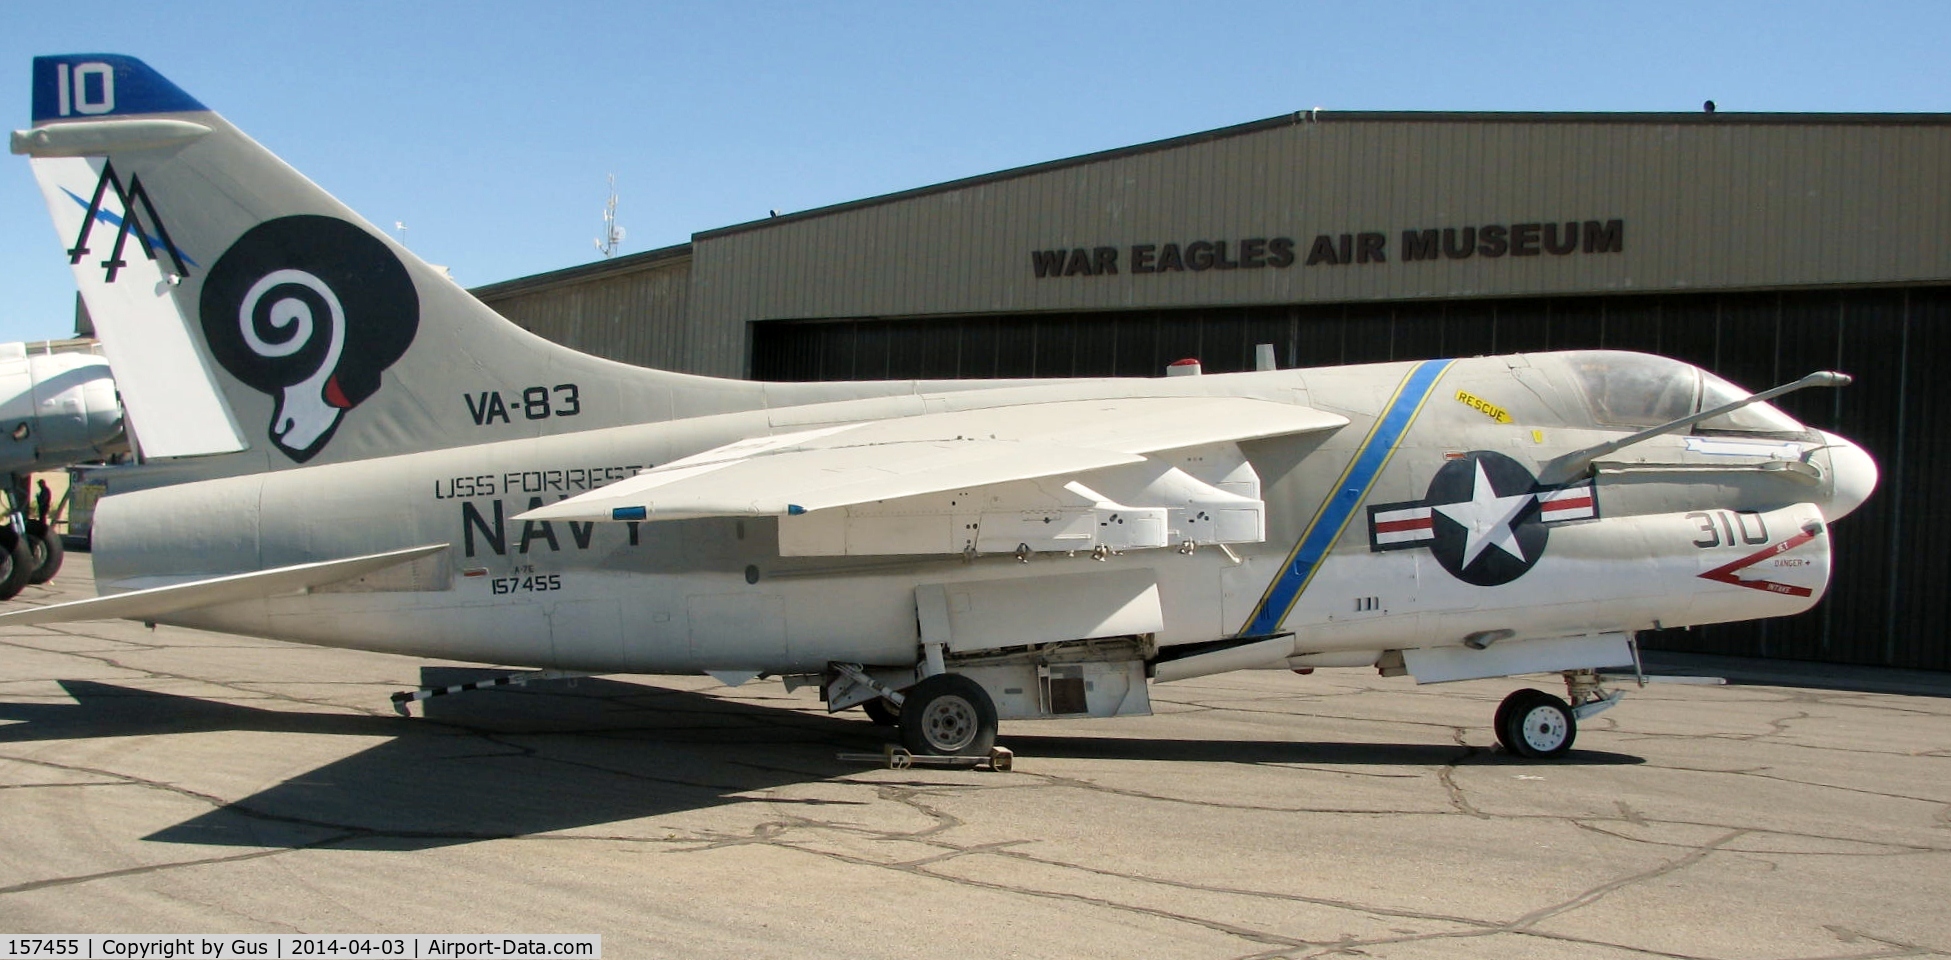 157455, LTV A-7E Corsair II C/N E-178, Repainted aircraft now on display on the flight line of the museum